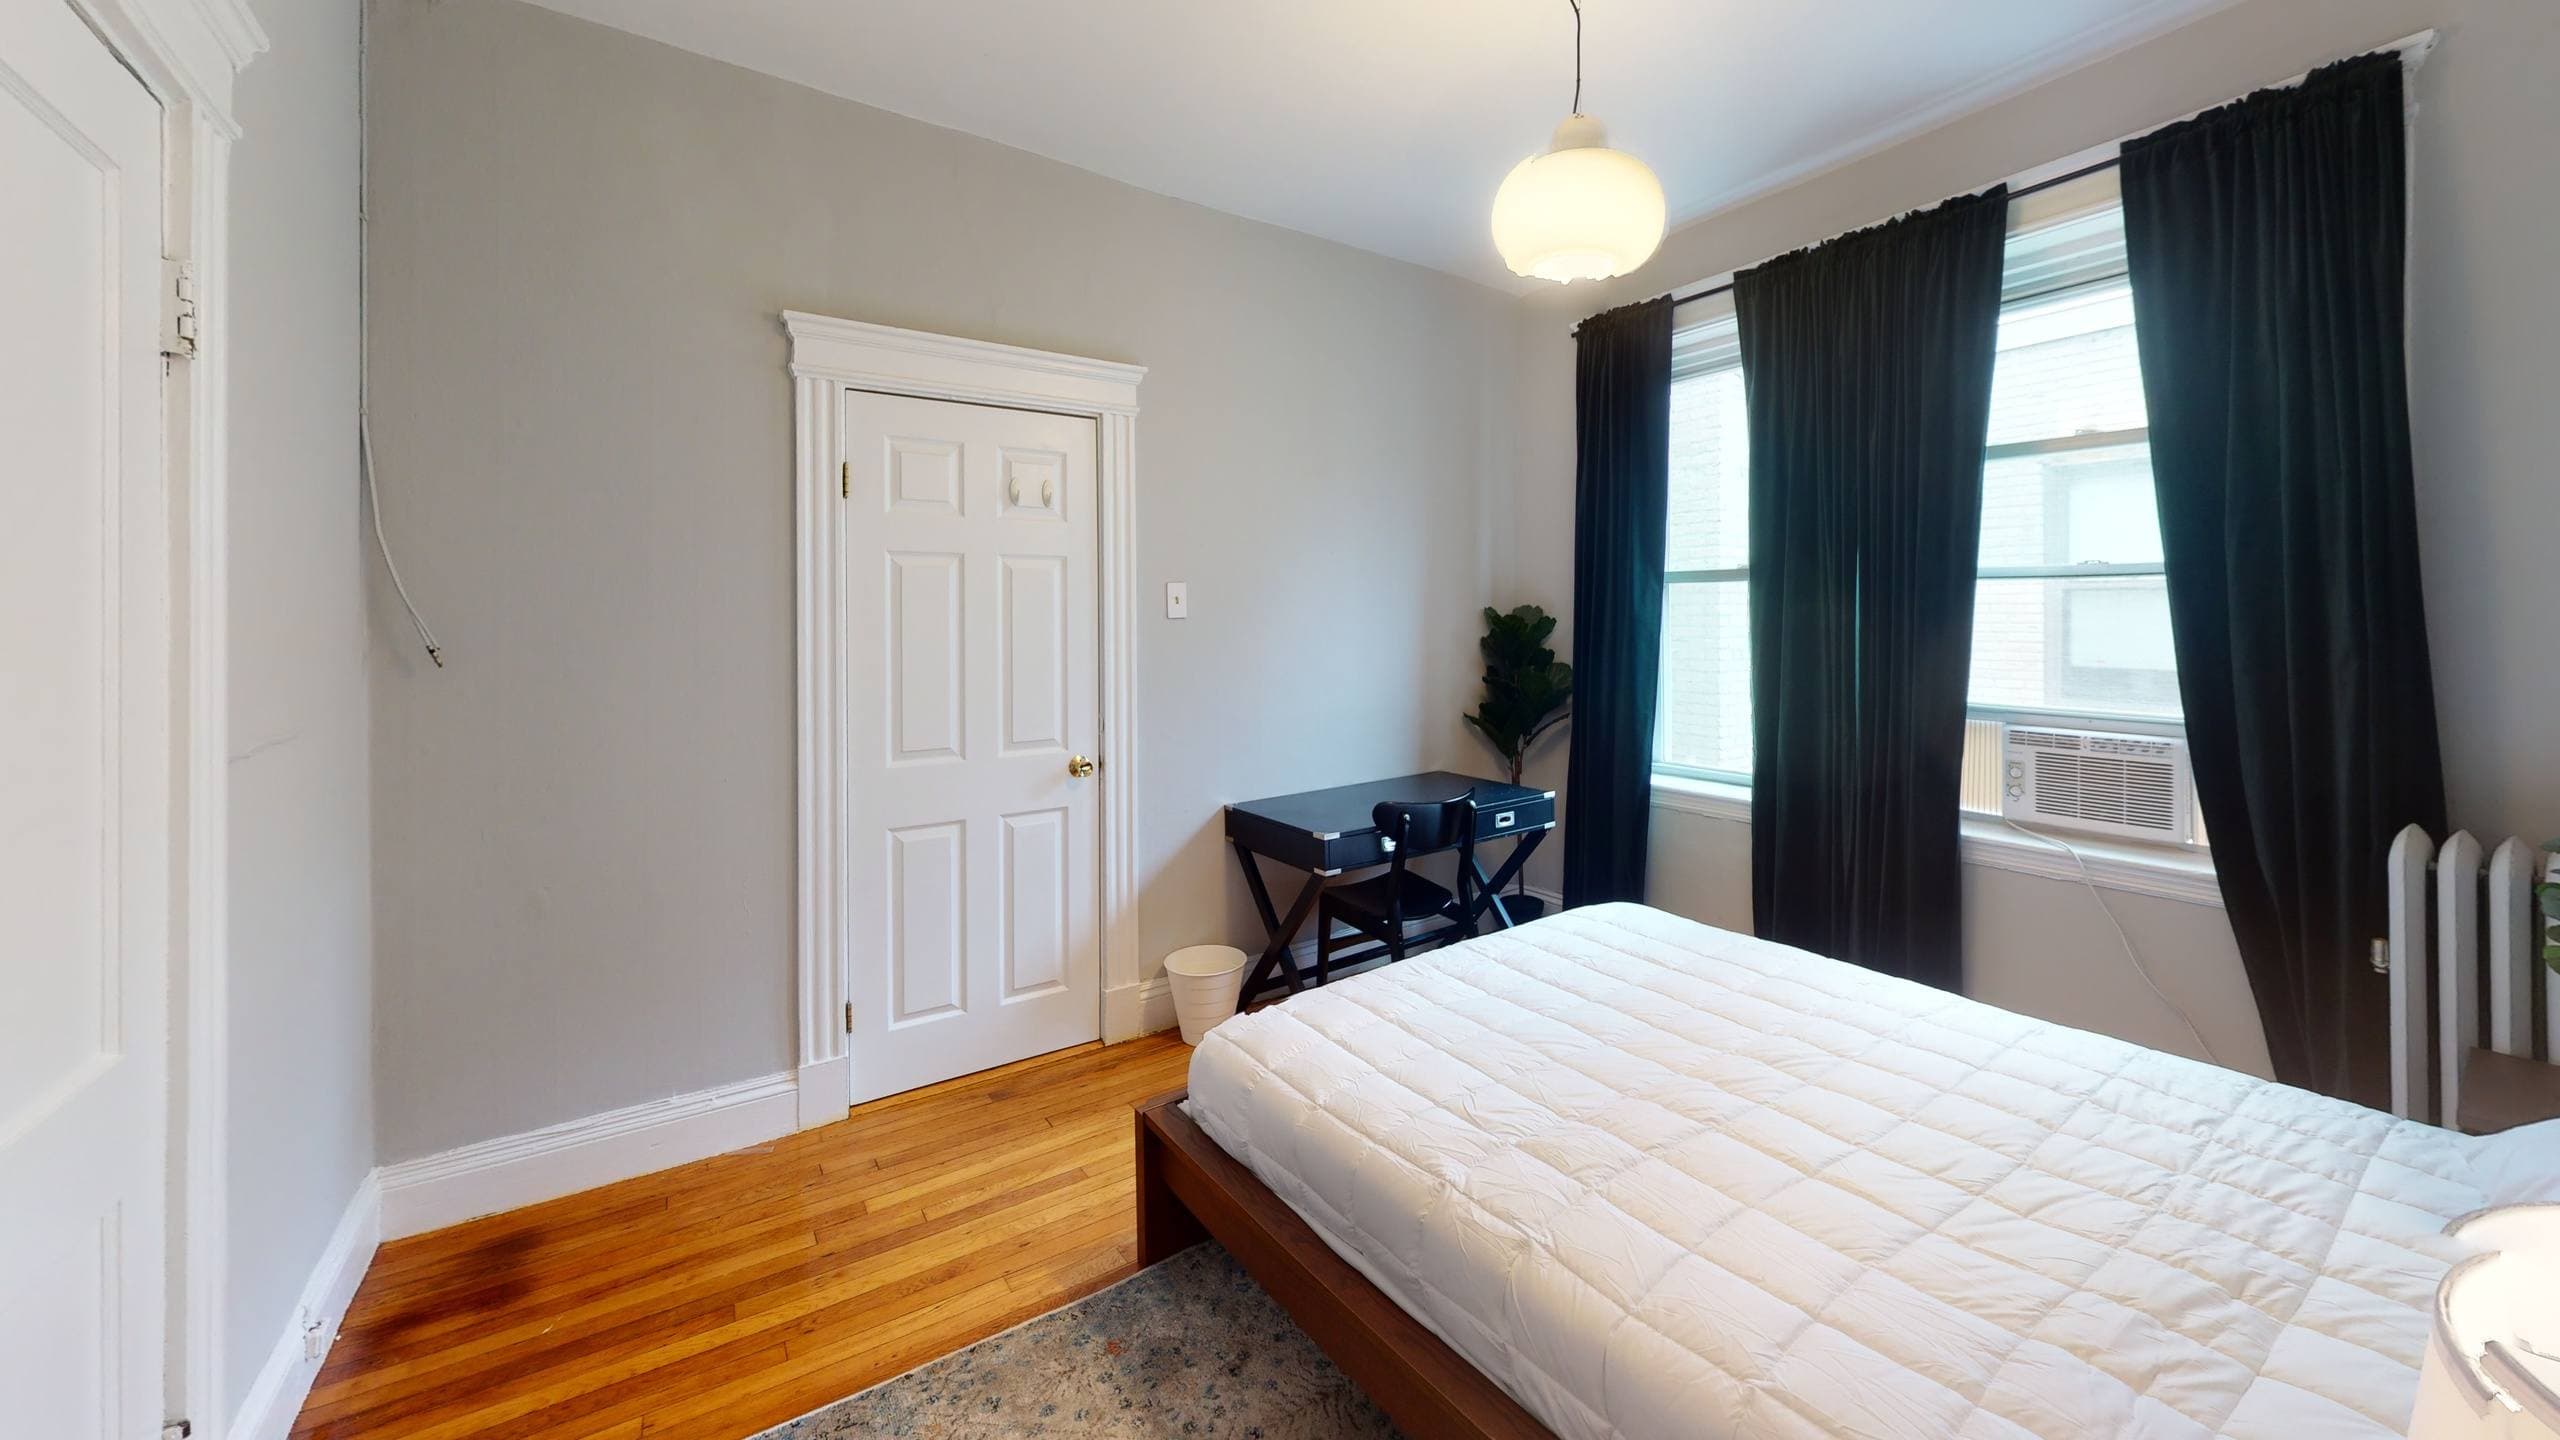 Photo 2 of #1293: Queen Bedroom 4A at June Homes